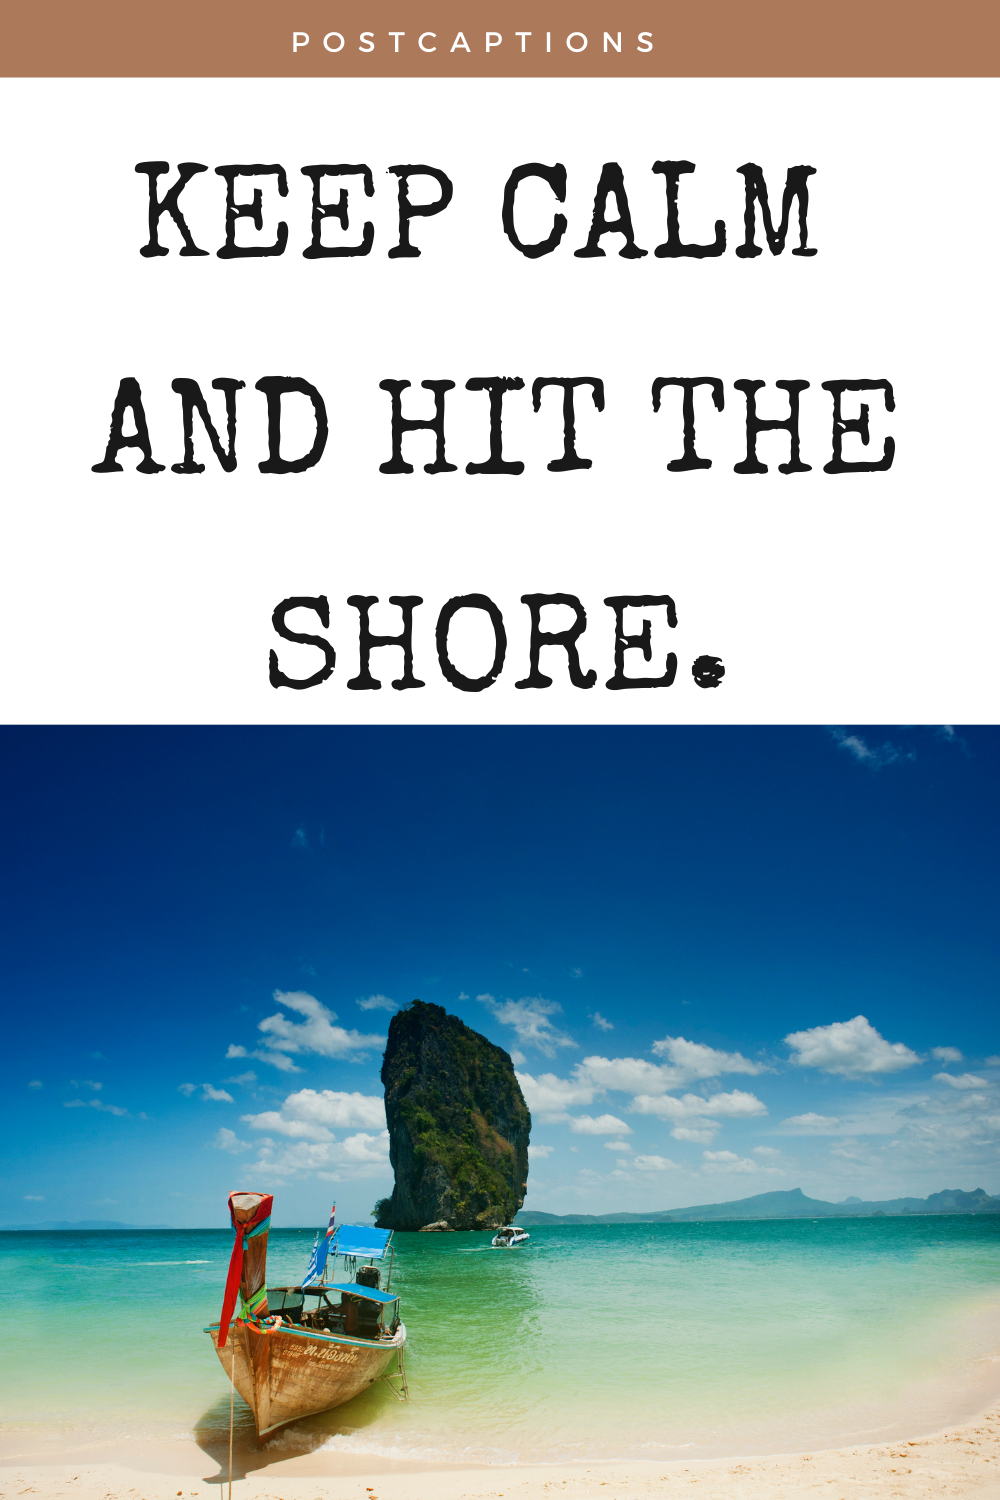 160 Perfect Beach Captions for Instagram